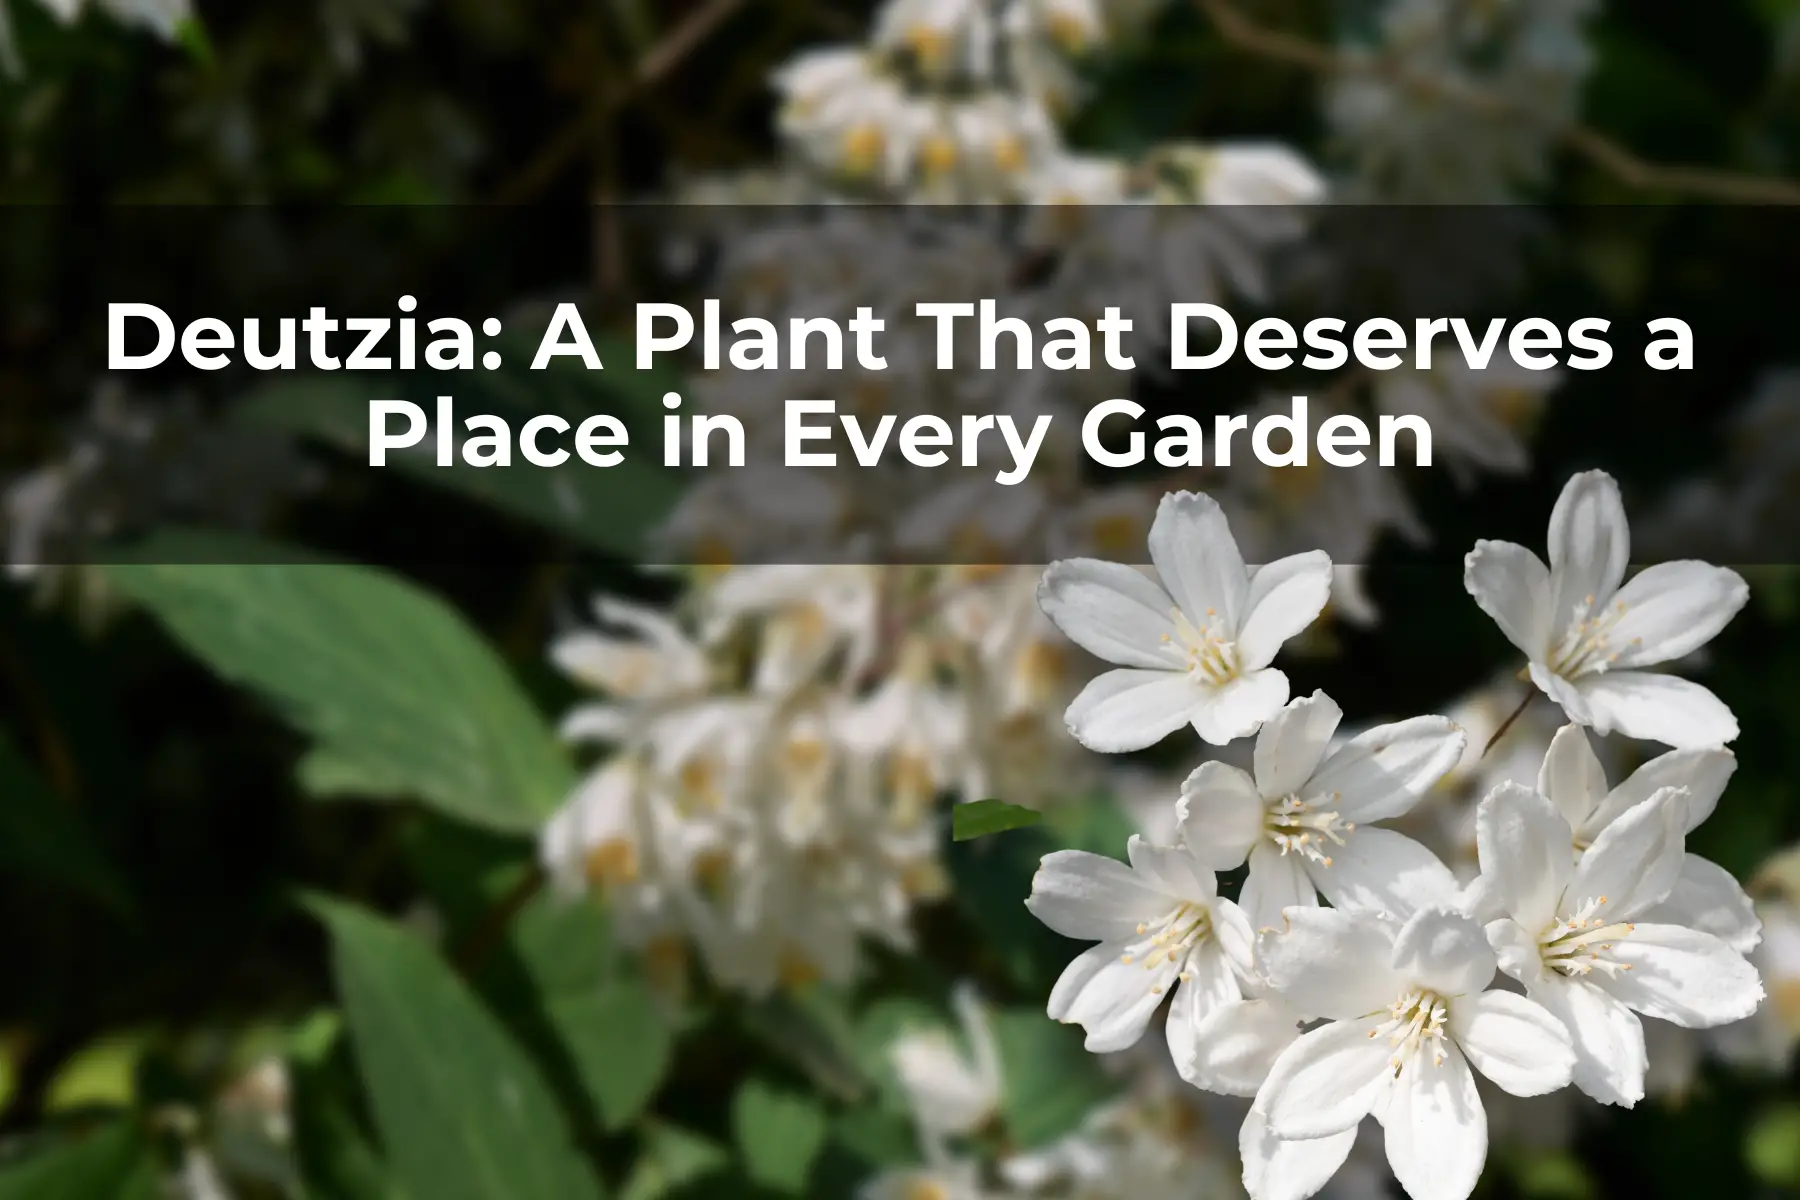 Deutzia: A Plant That Deserves a Place in Every Garden